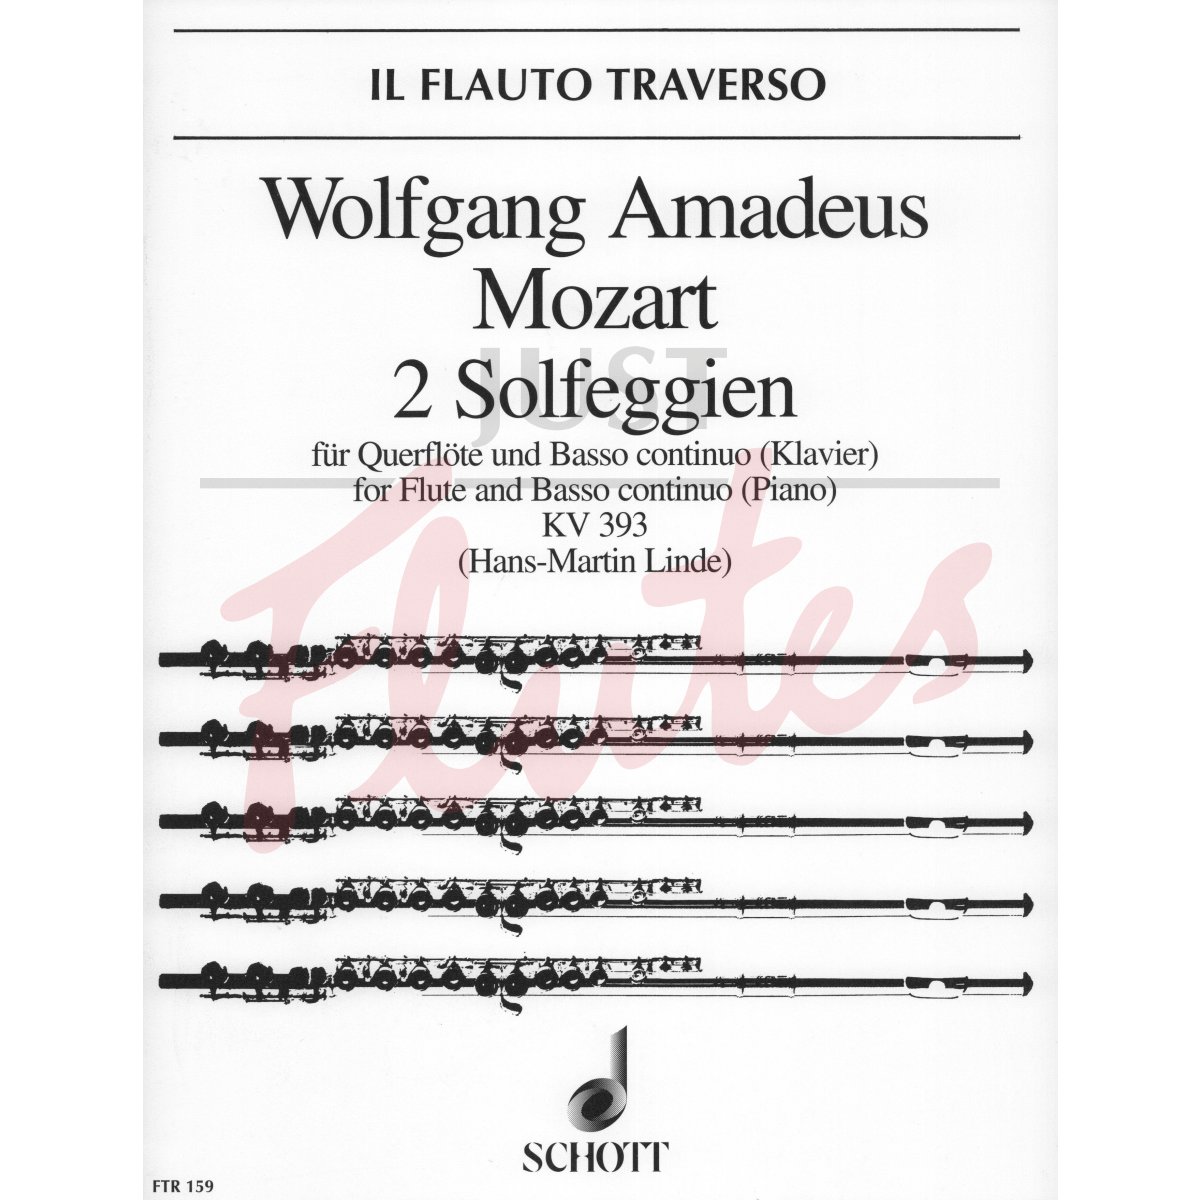 Two Solfeggien for Flute and Piano